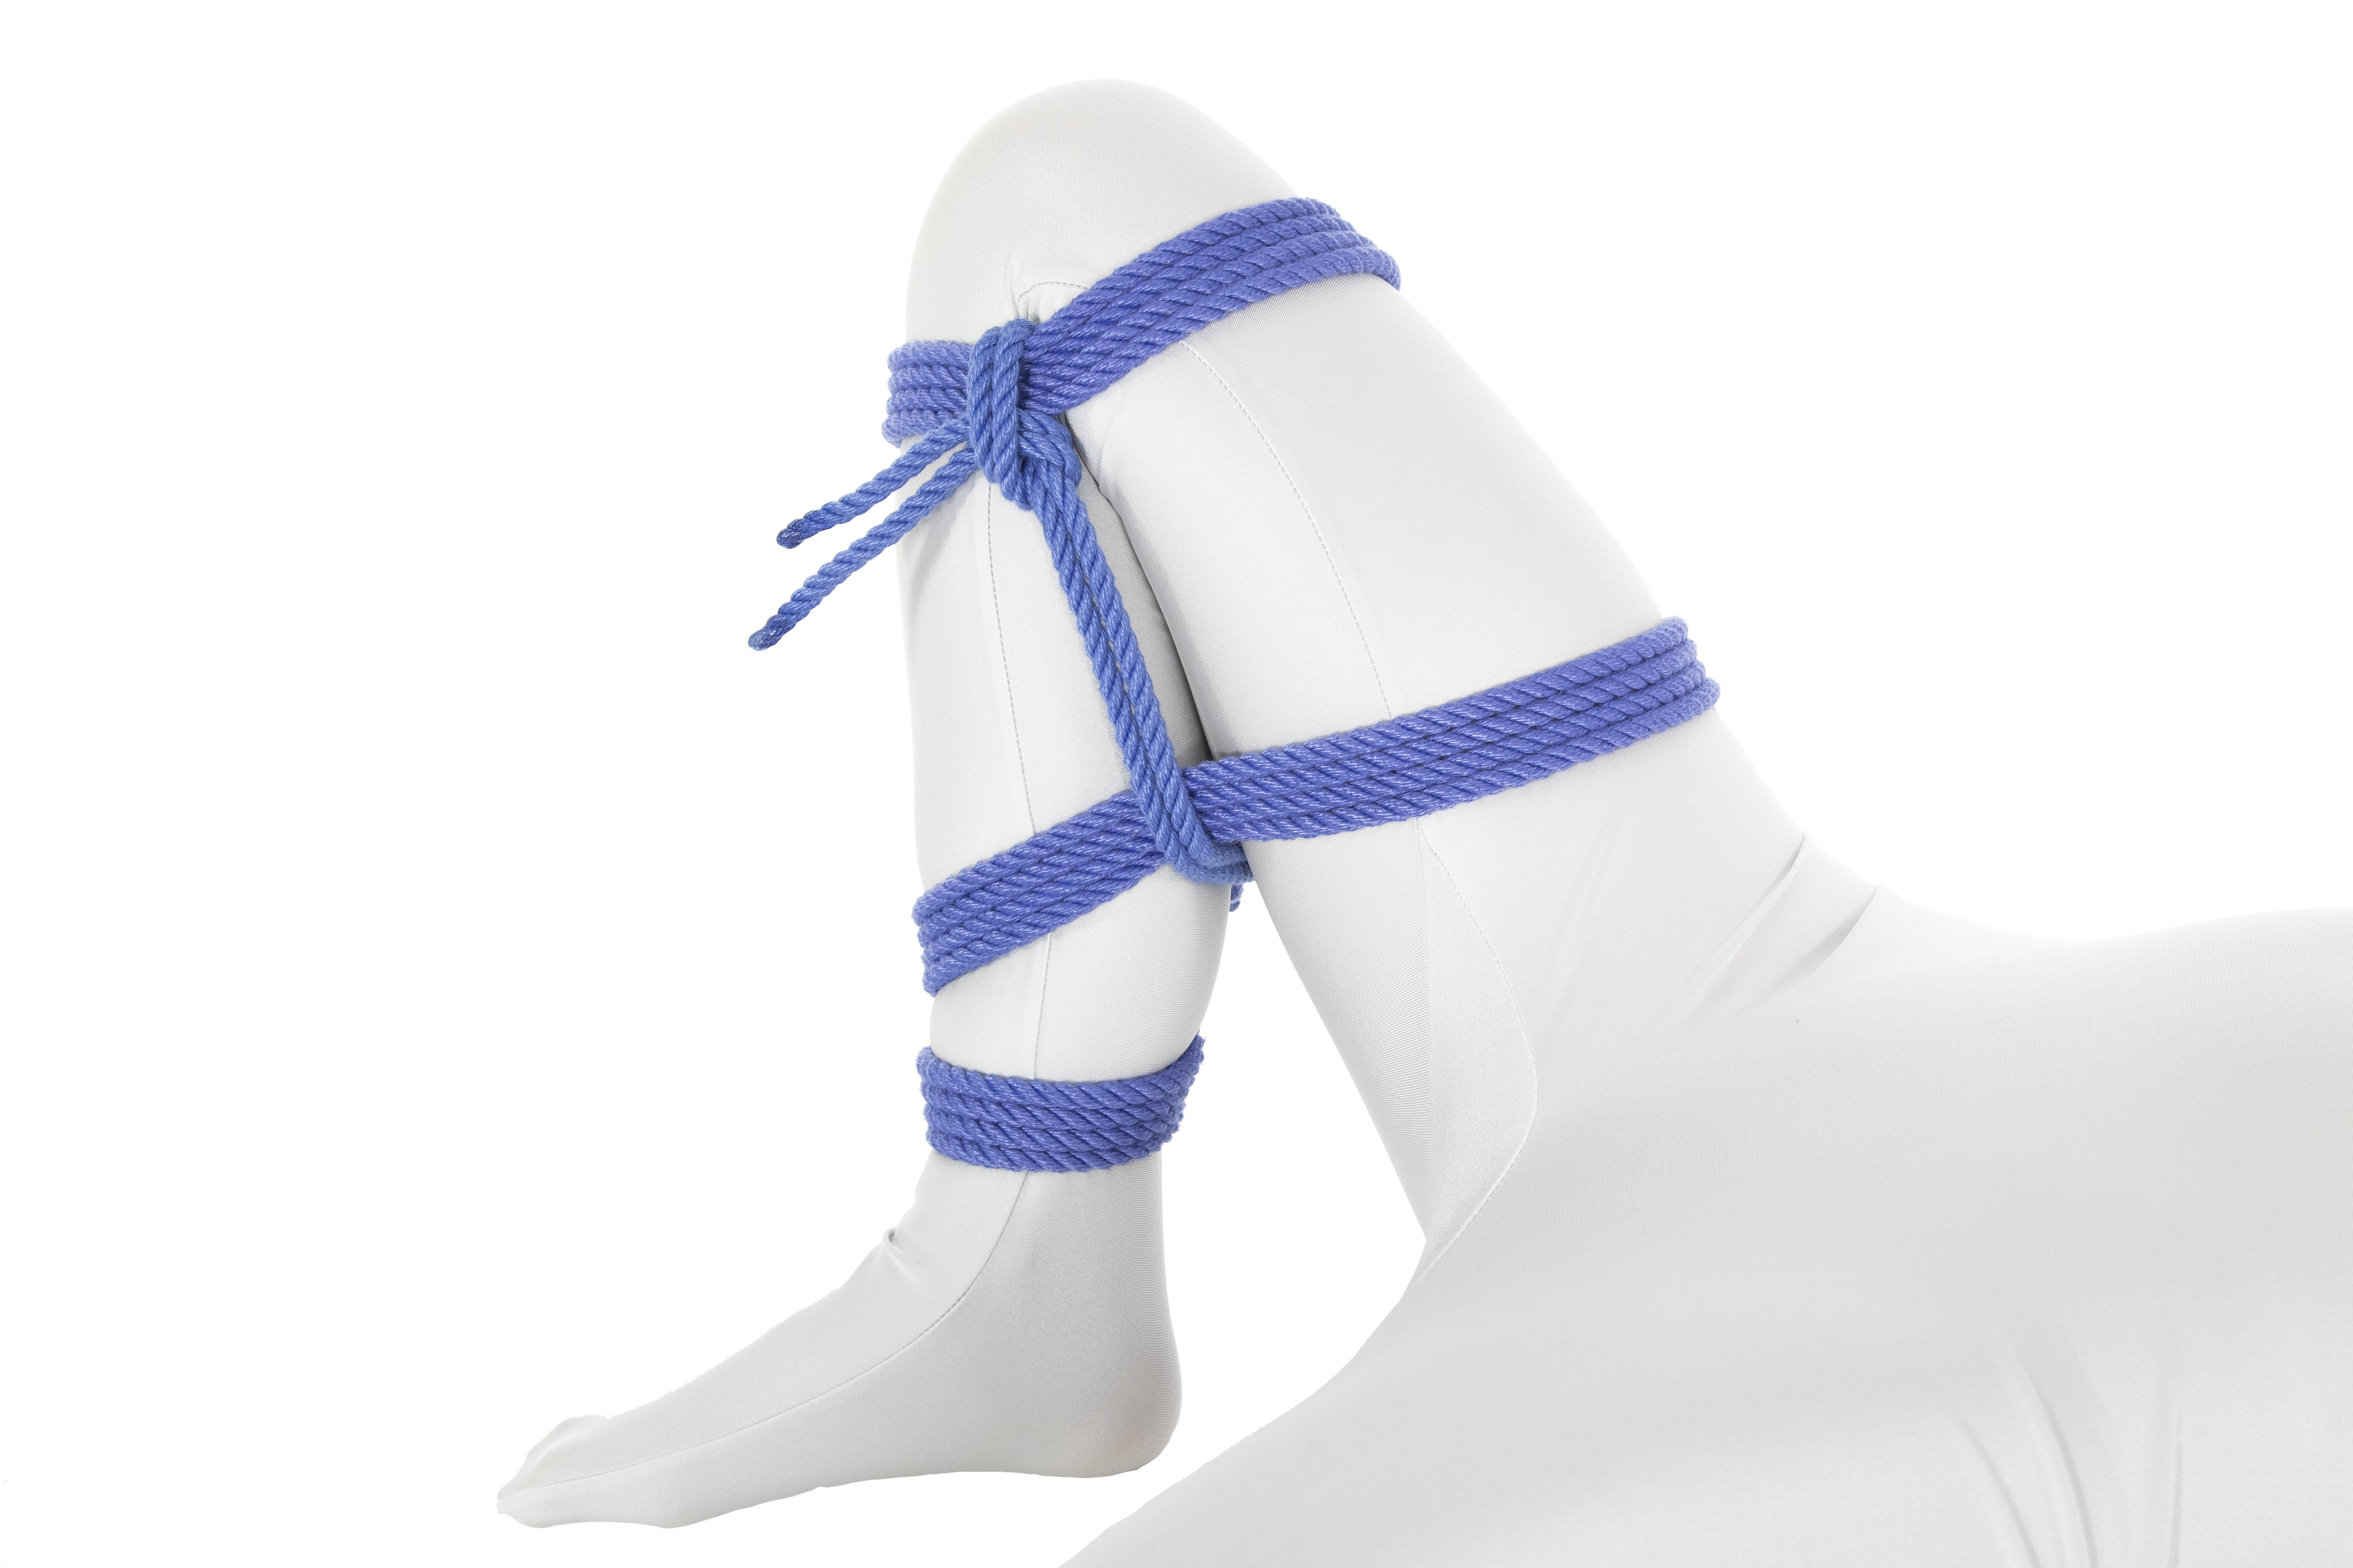 A leg in a white bodysuit with blue rope tied around the ankle and making two wide bands that bind the leg into a bent position.